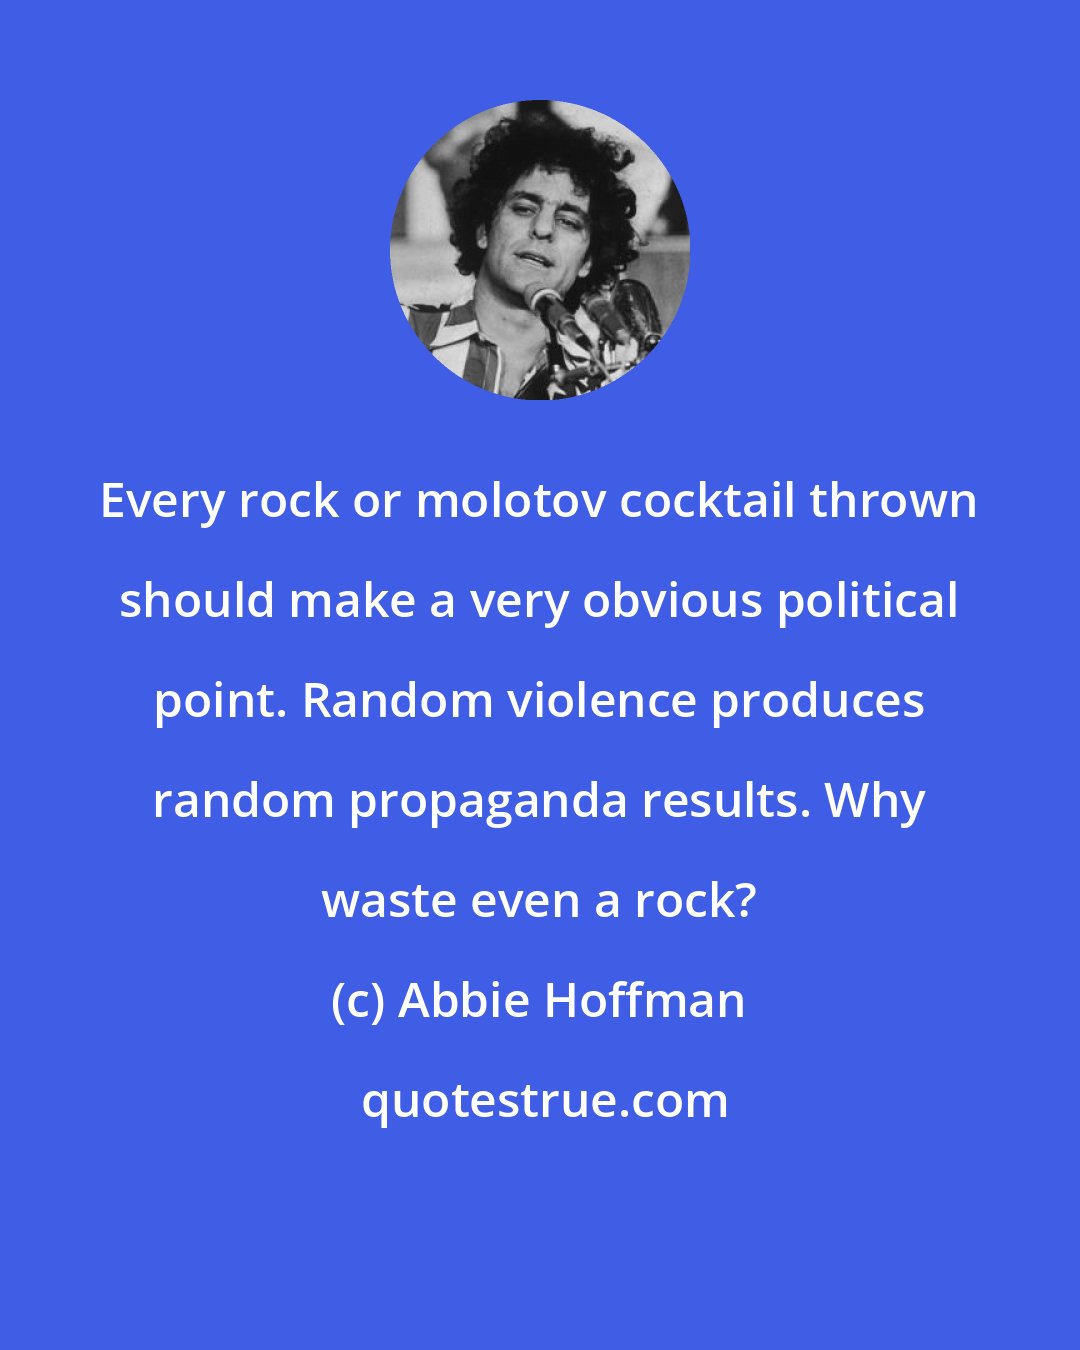 Abbie Hoffman: Every rock or molotov cocktail thrown should make a very obvious political point. Random violence produces random propaganda results. Why waste even a rock?